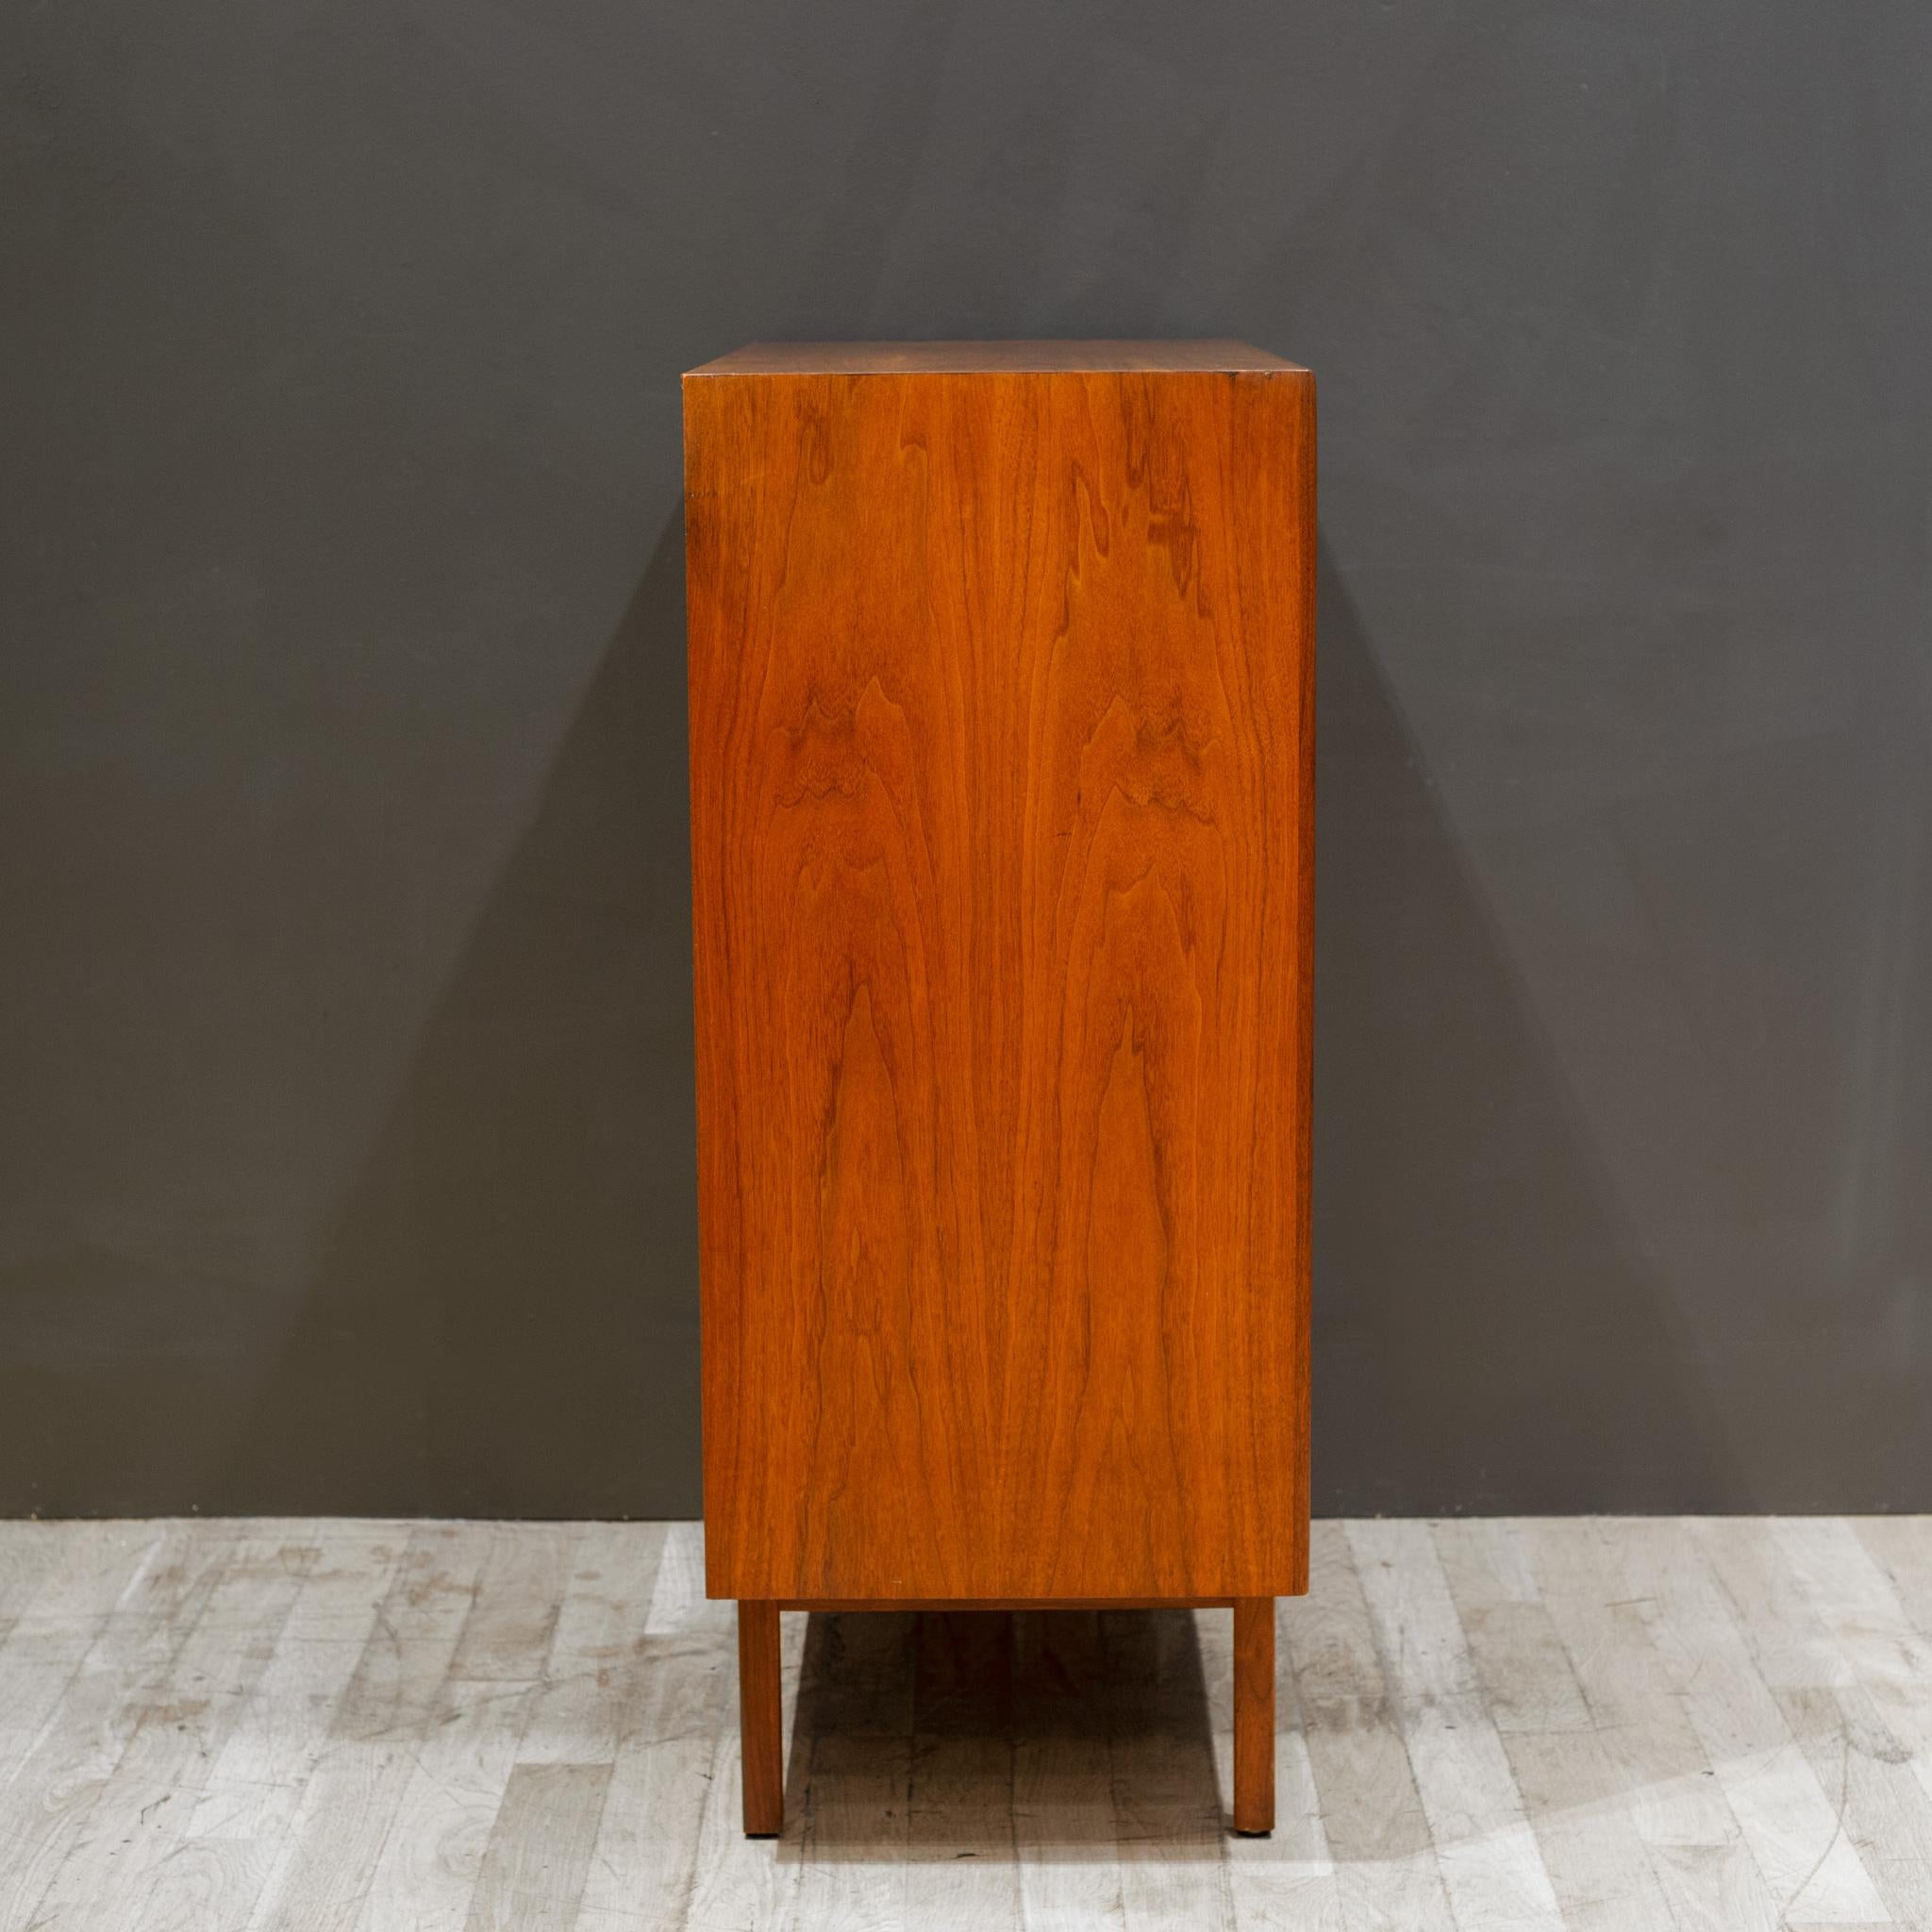 American Mid-century Walnut Jack Cartwright for Founders Tall Dresser c.1960 For Sale